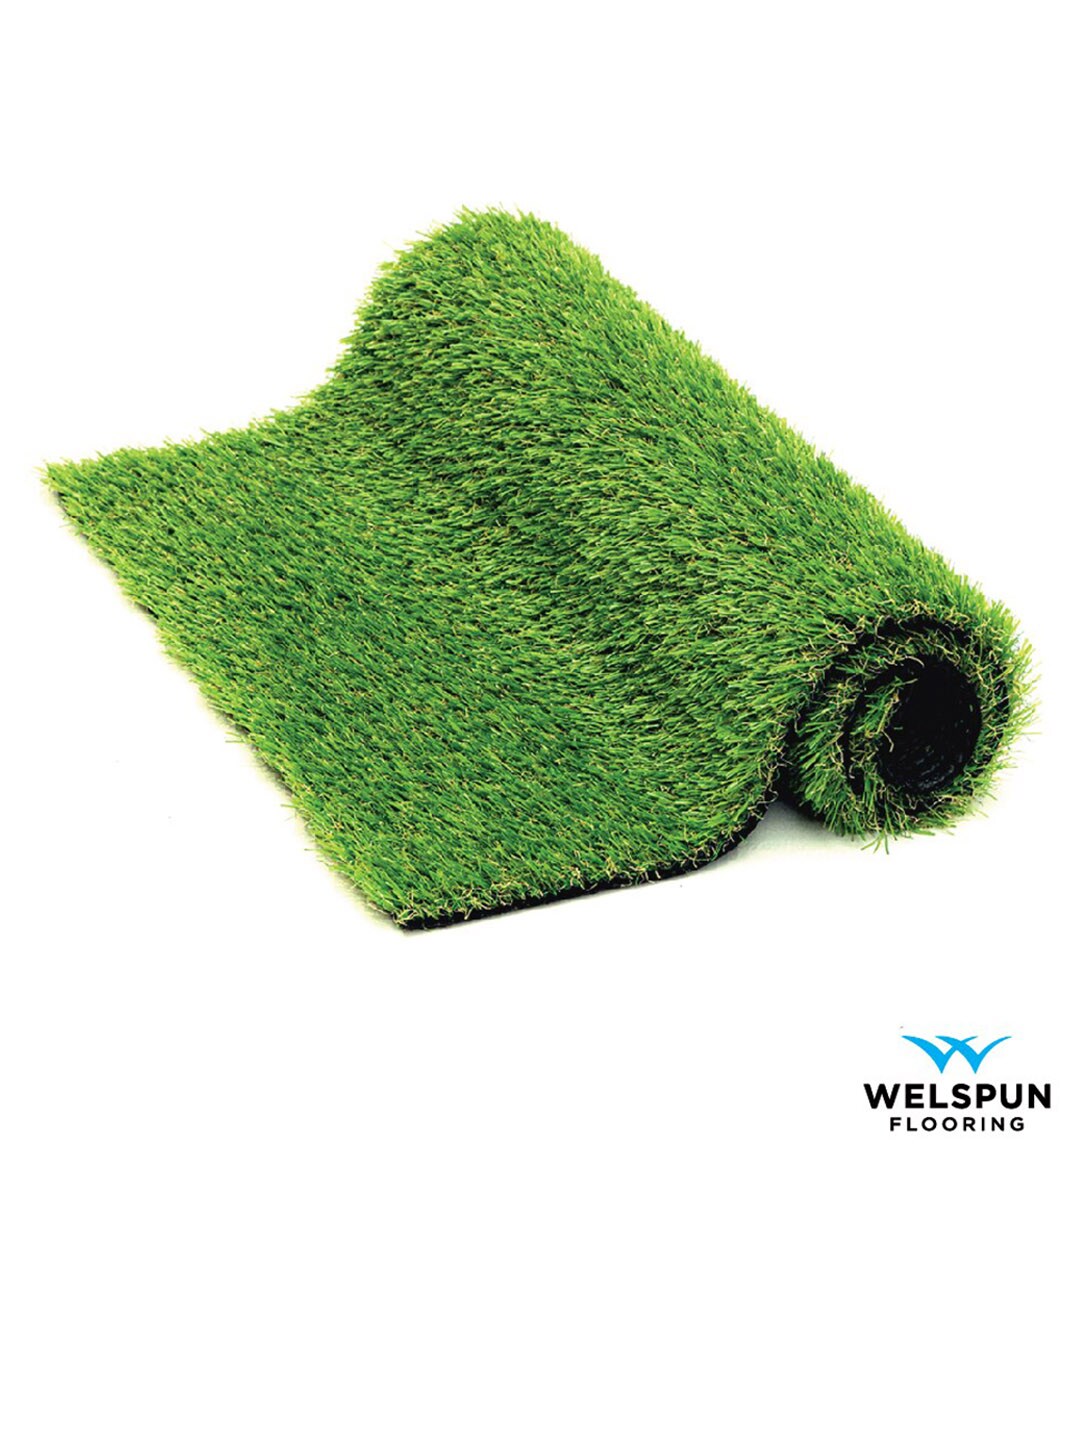 Welspun Green Highly Durable Grass Mat Price in India